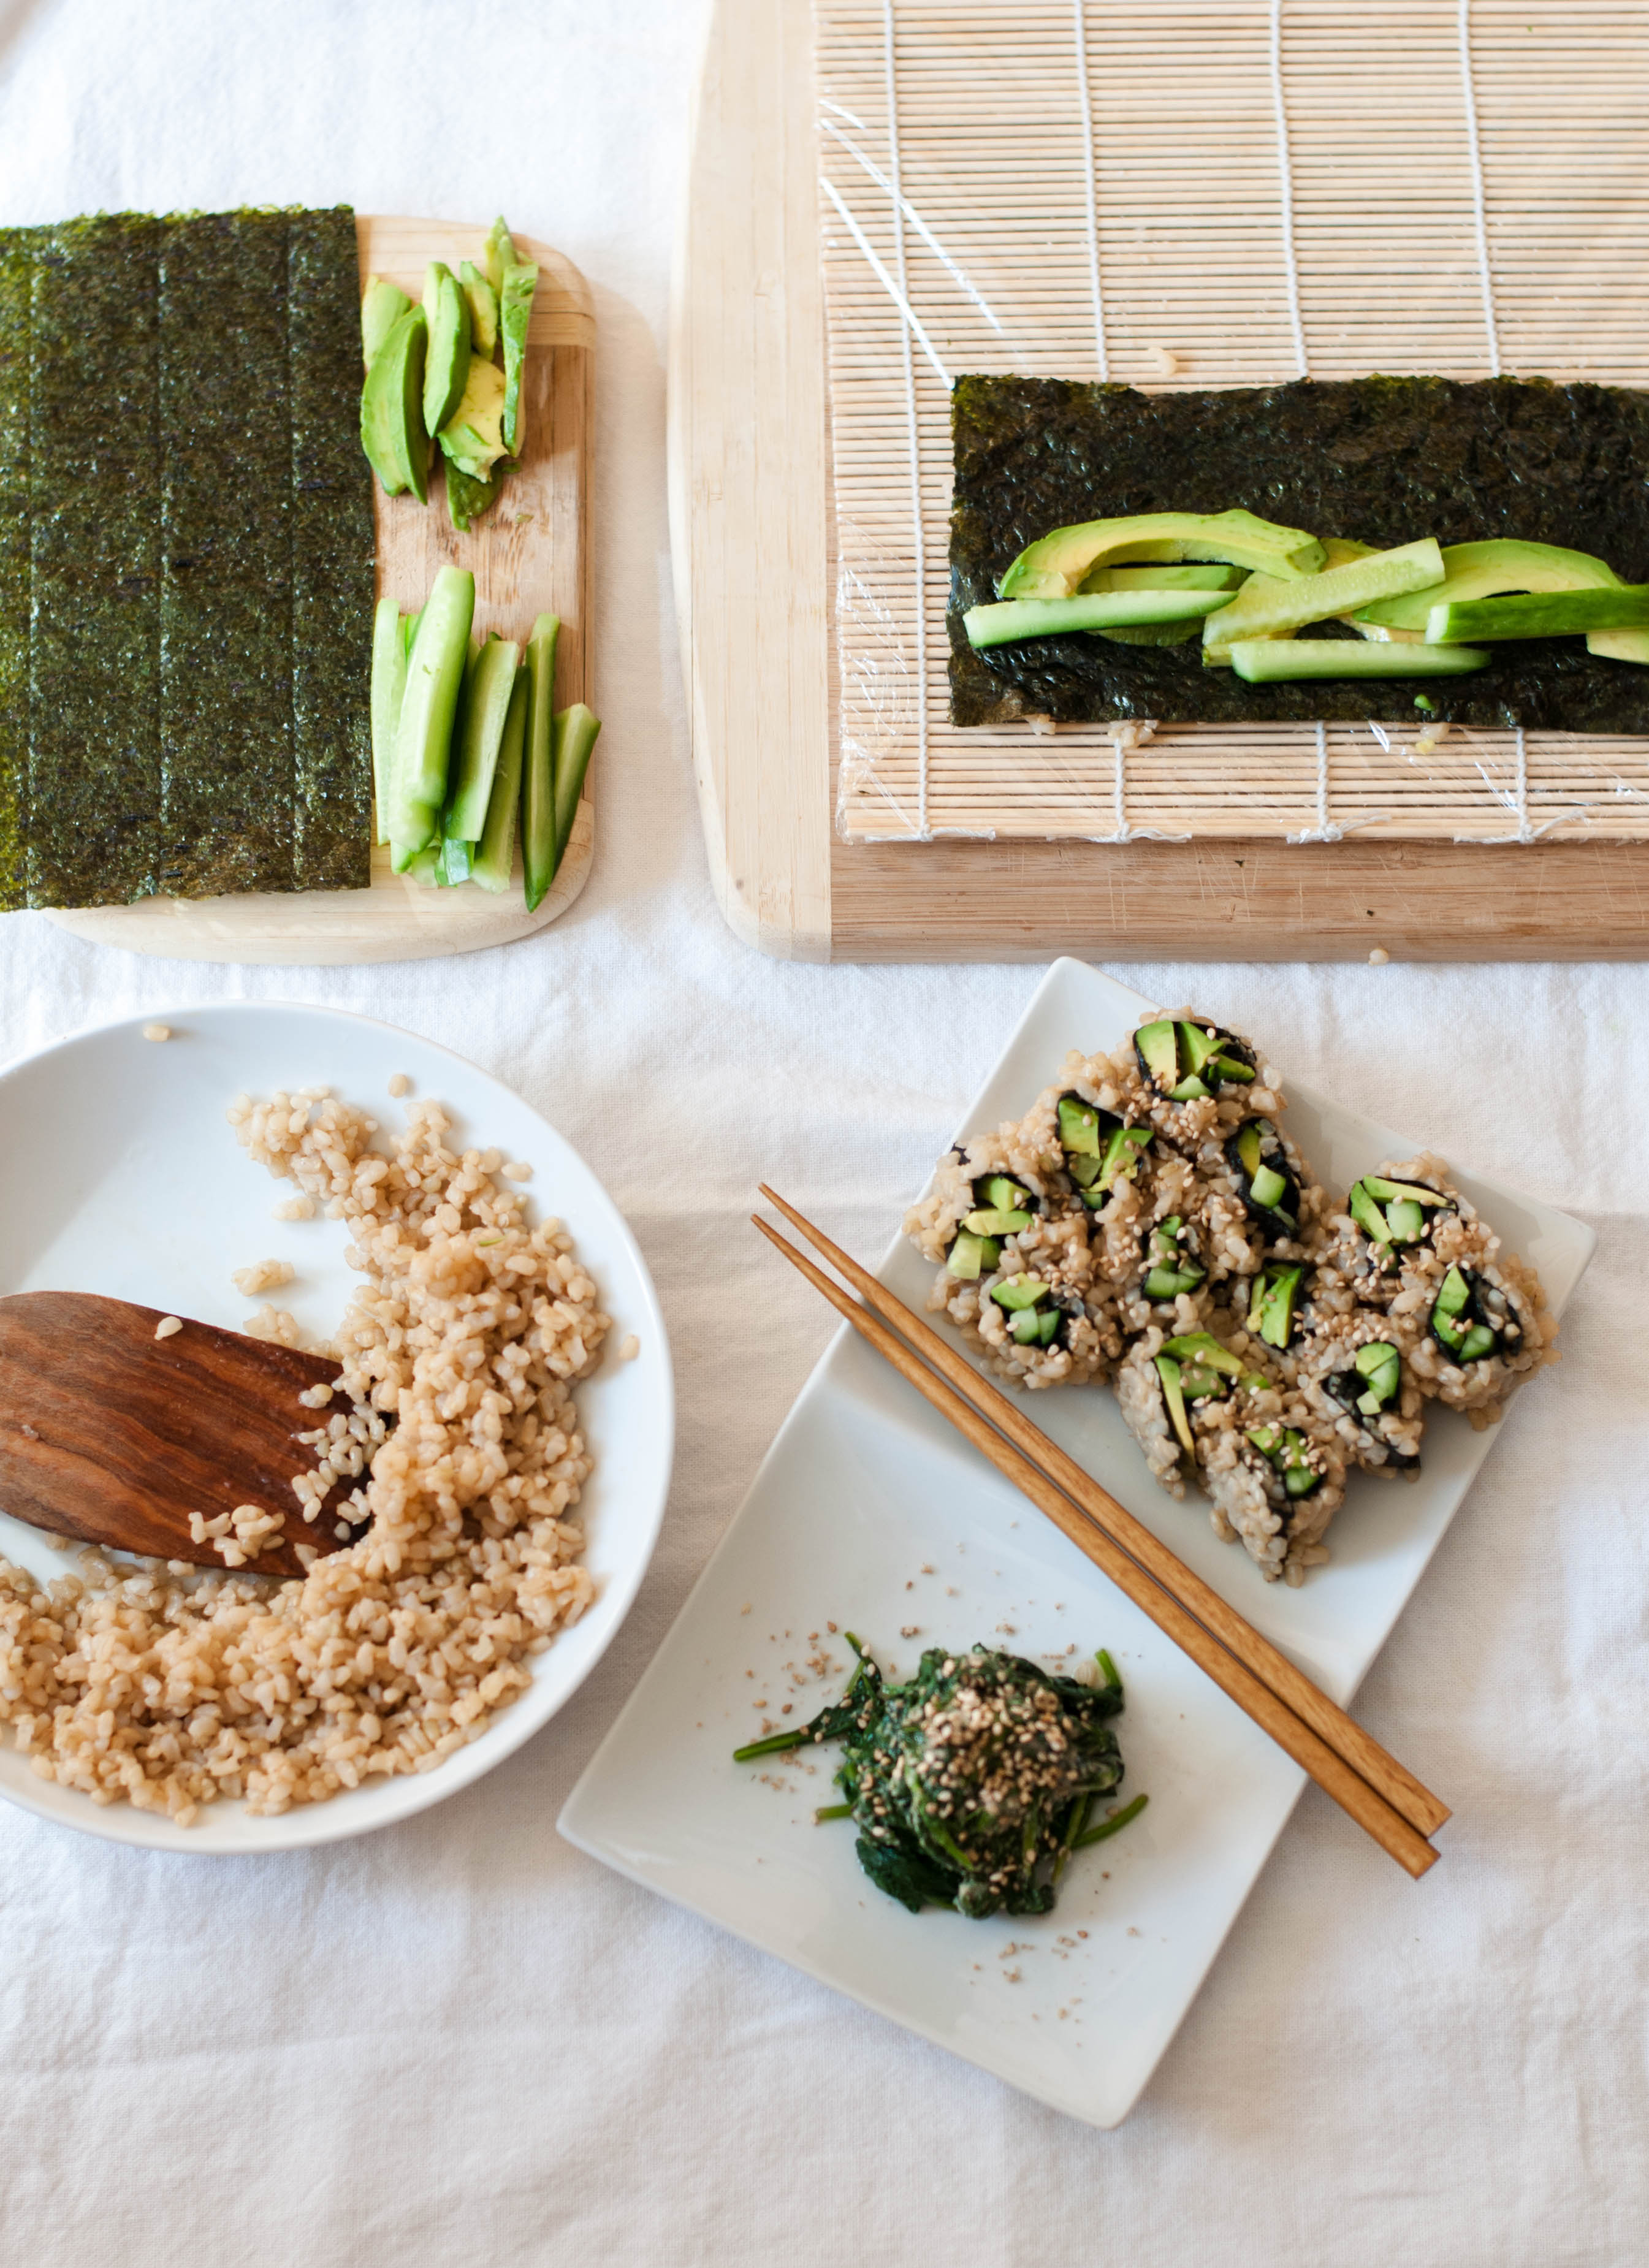 Vegetable Sushi Roll & Spinach Sesame Miso Salad (Goma-ae) - The Scratch Artist